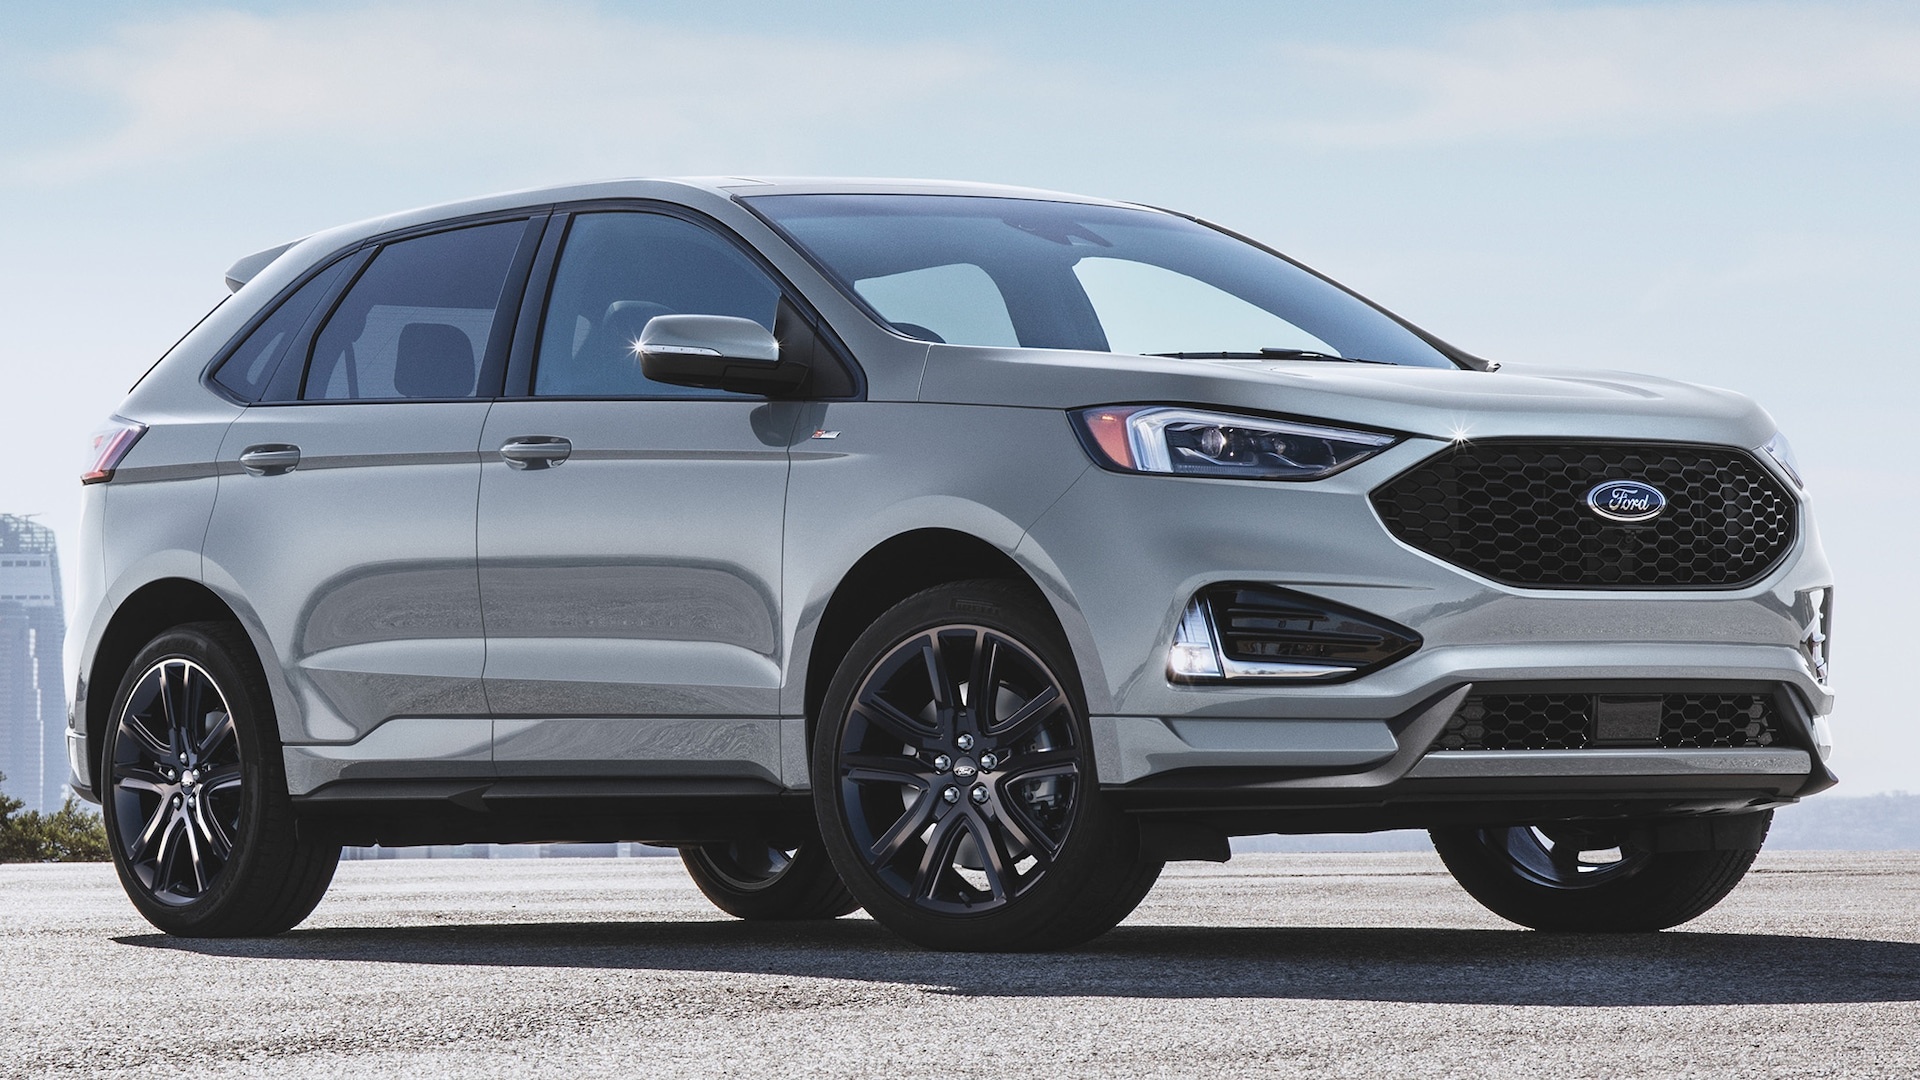 Ford Edge, Buyers guide, Reviews, Comparisons, 1920x1080 Full HD Desktop